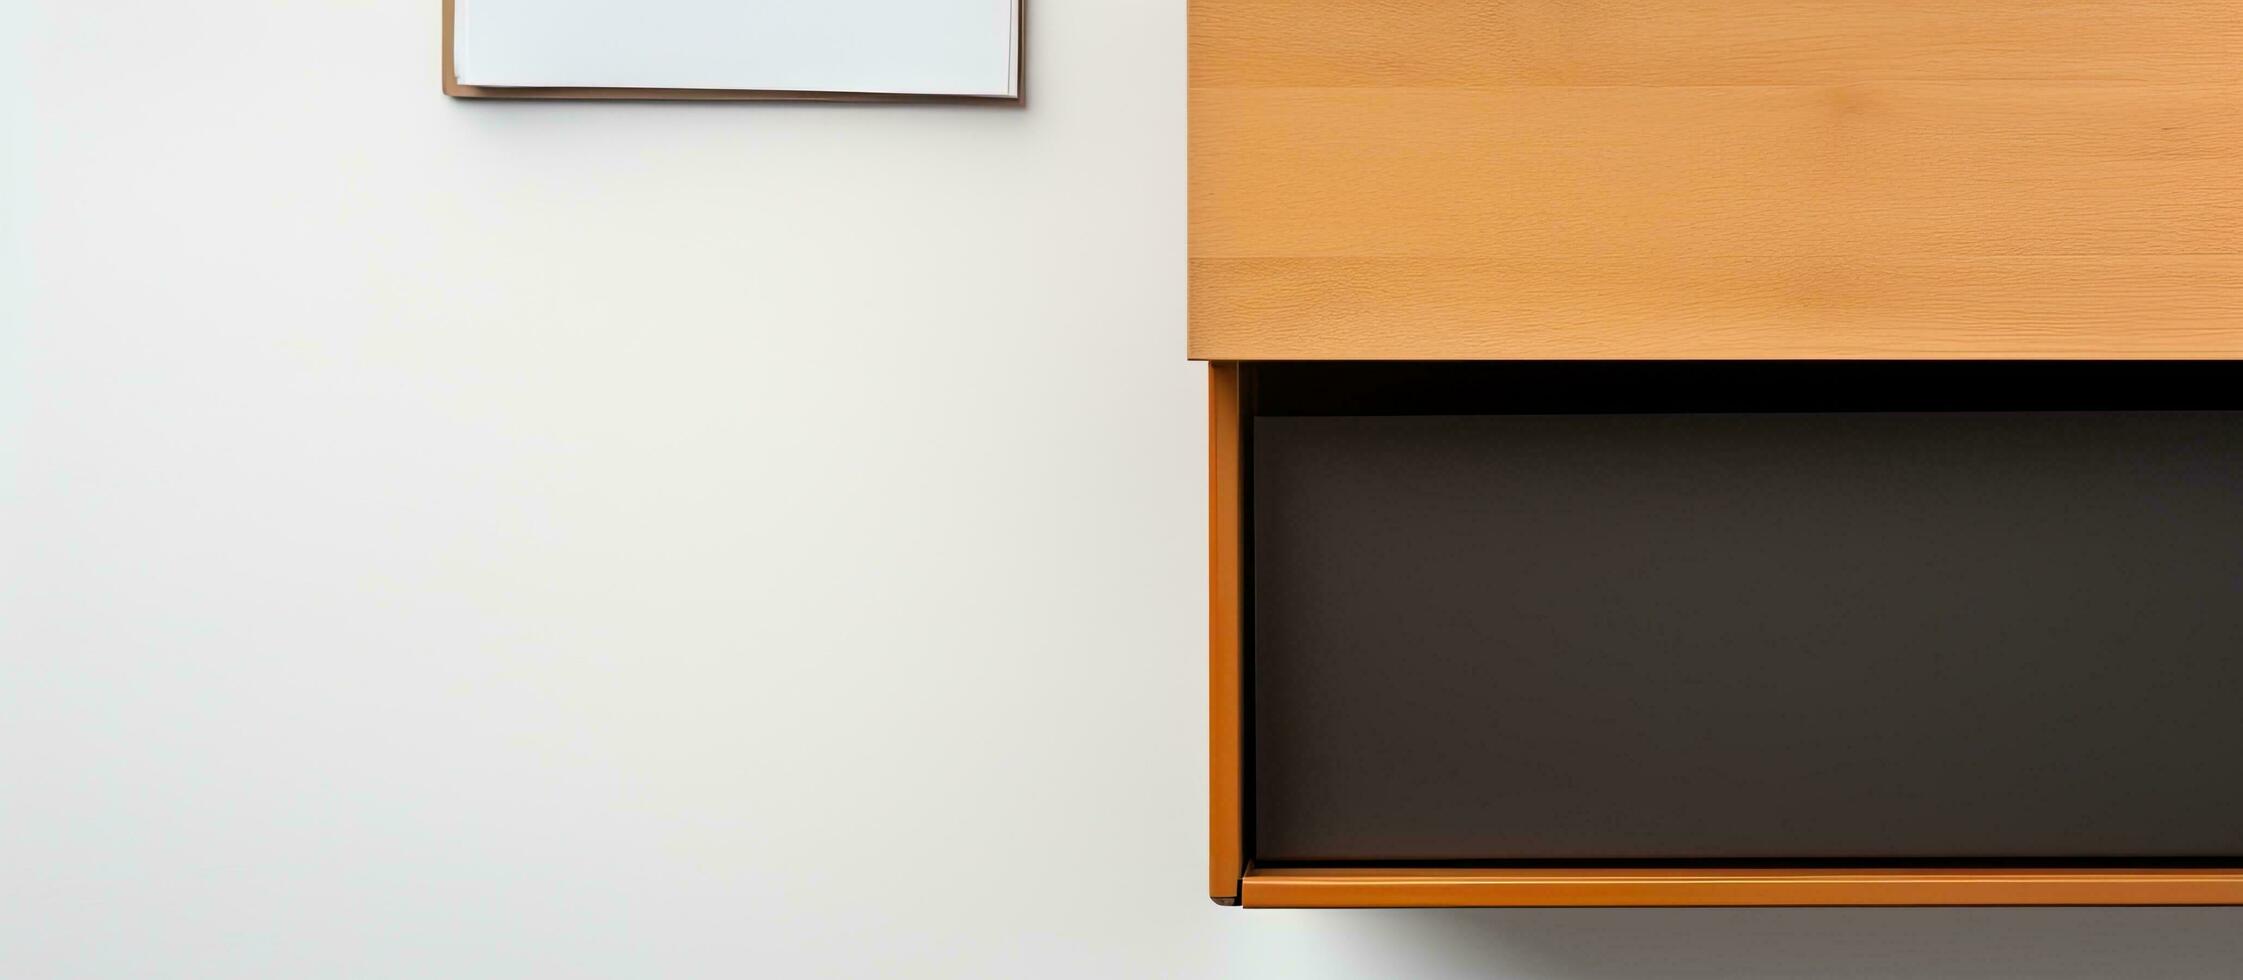 Photo of a wooden cabinet with a black drawer underneath it, providing ample storage space with copy space